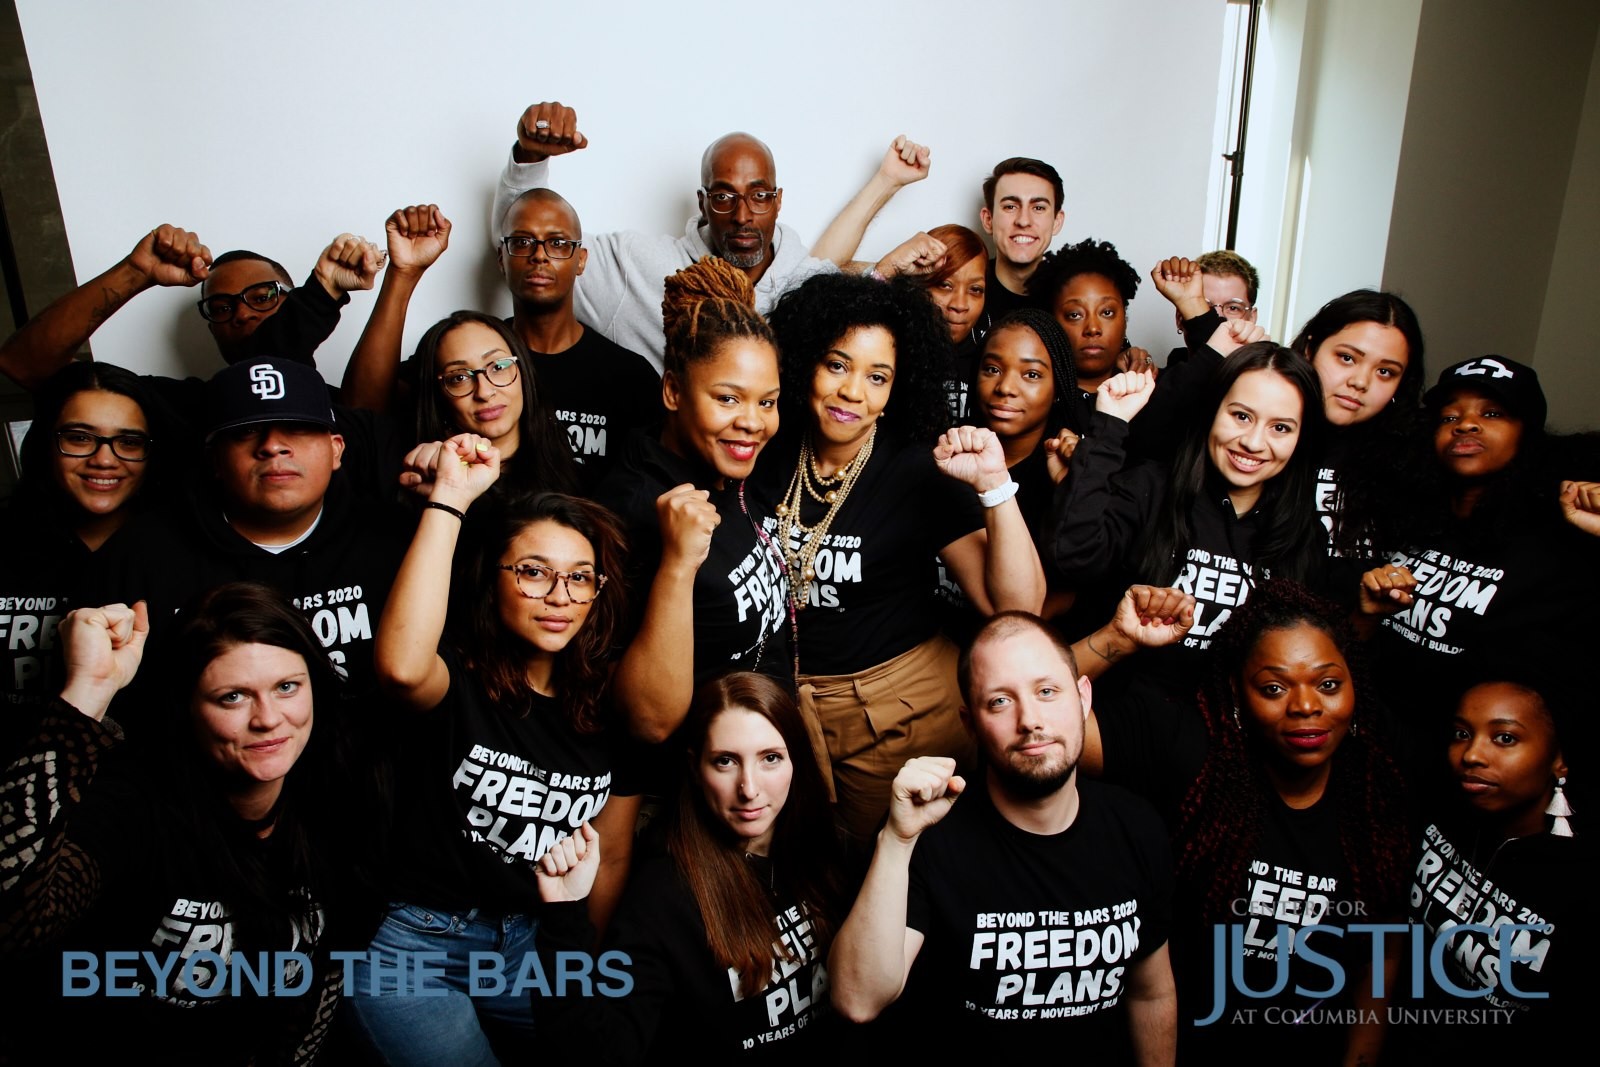 Beyond the Bars fellows with fists in the air